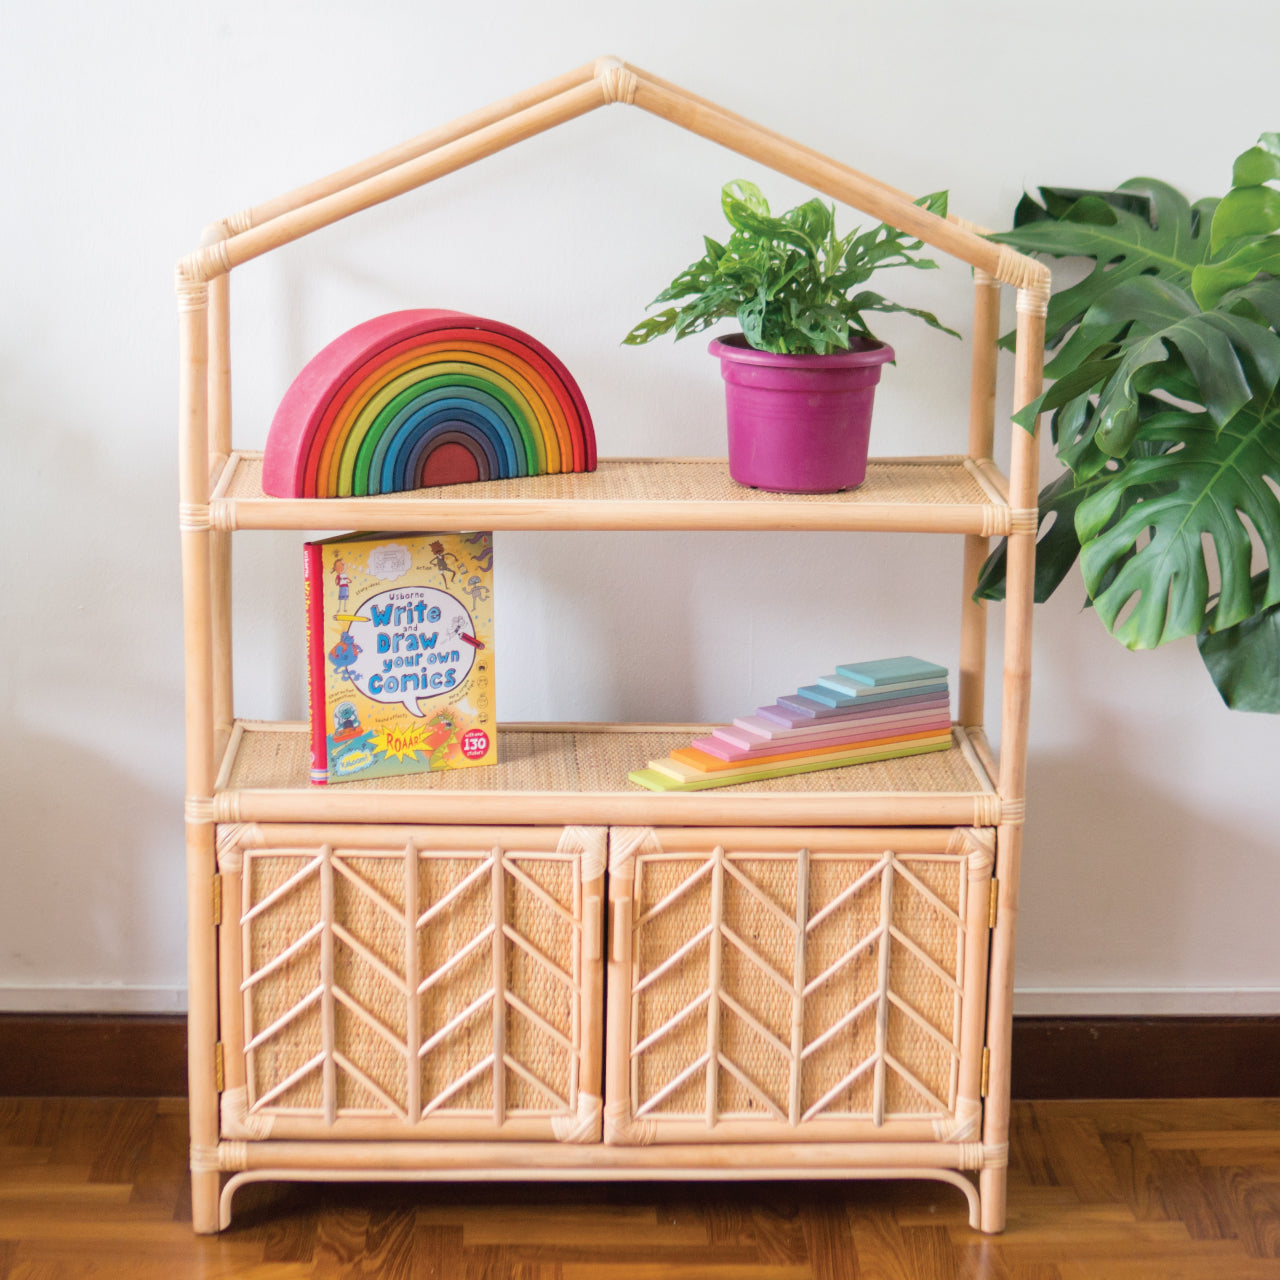 Stef's Cosy Home Display and Storage House Shelf | Shop Rattan Furniture and Toys Online | Kathy's Cove